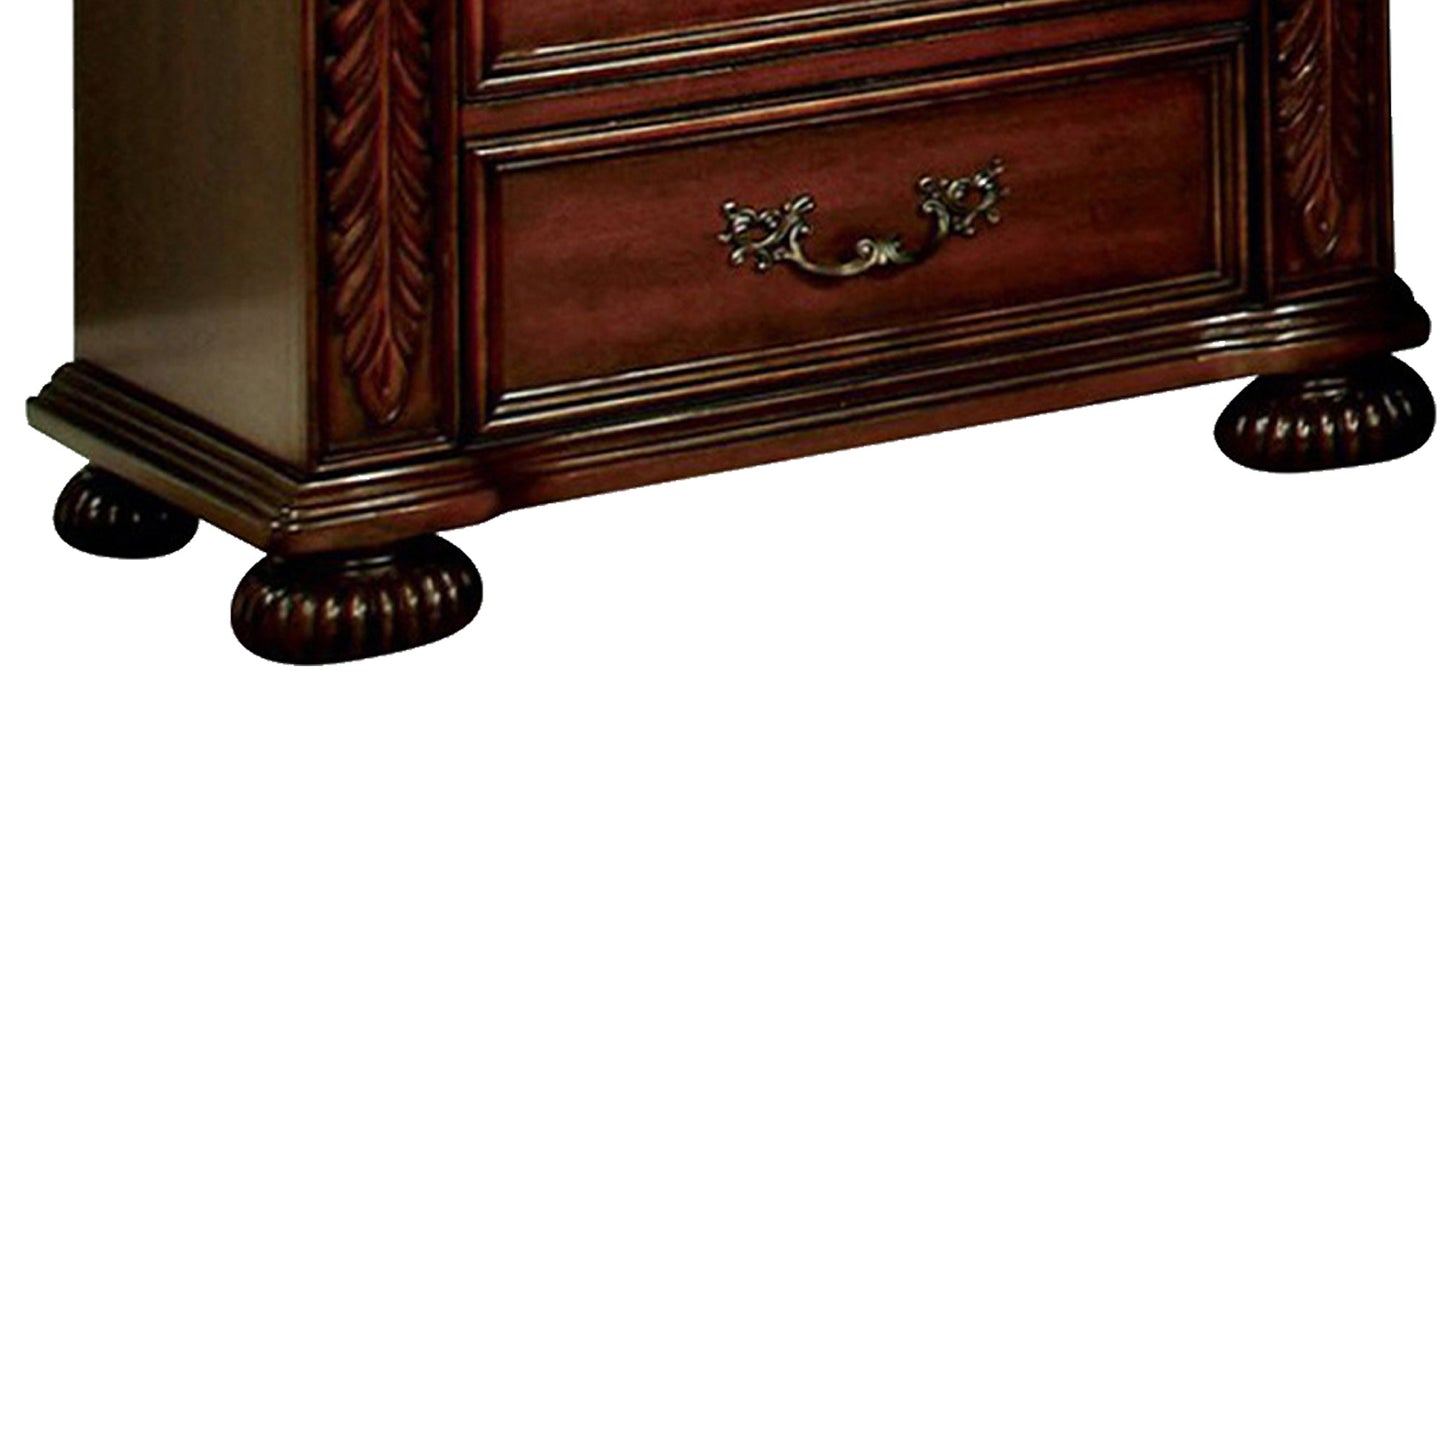 29 Inch Handcrafted Vintage Style Nightstand 3 Drawers Carved Trim Cherry Brown Wood The Urban Port BM123241